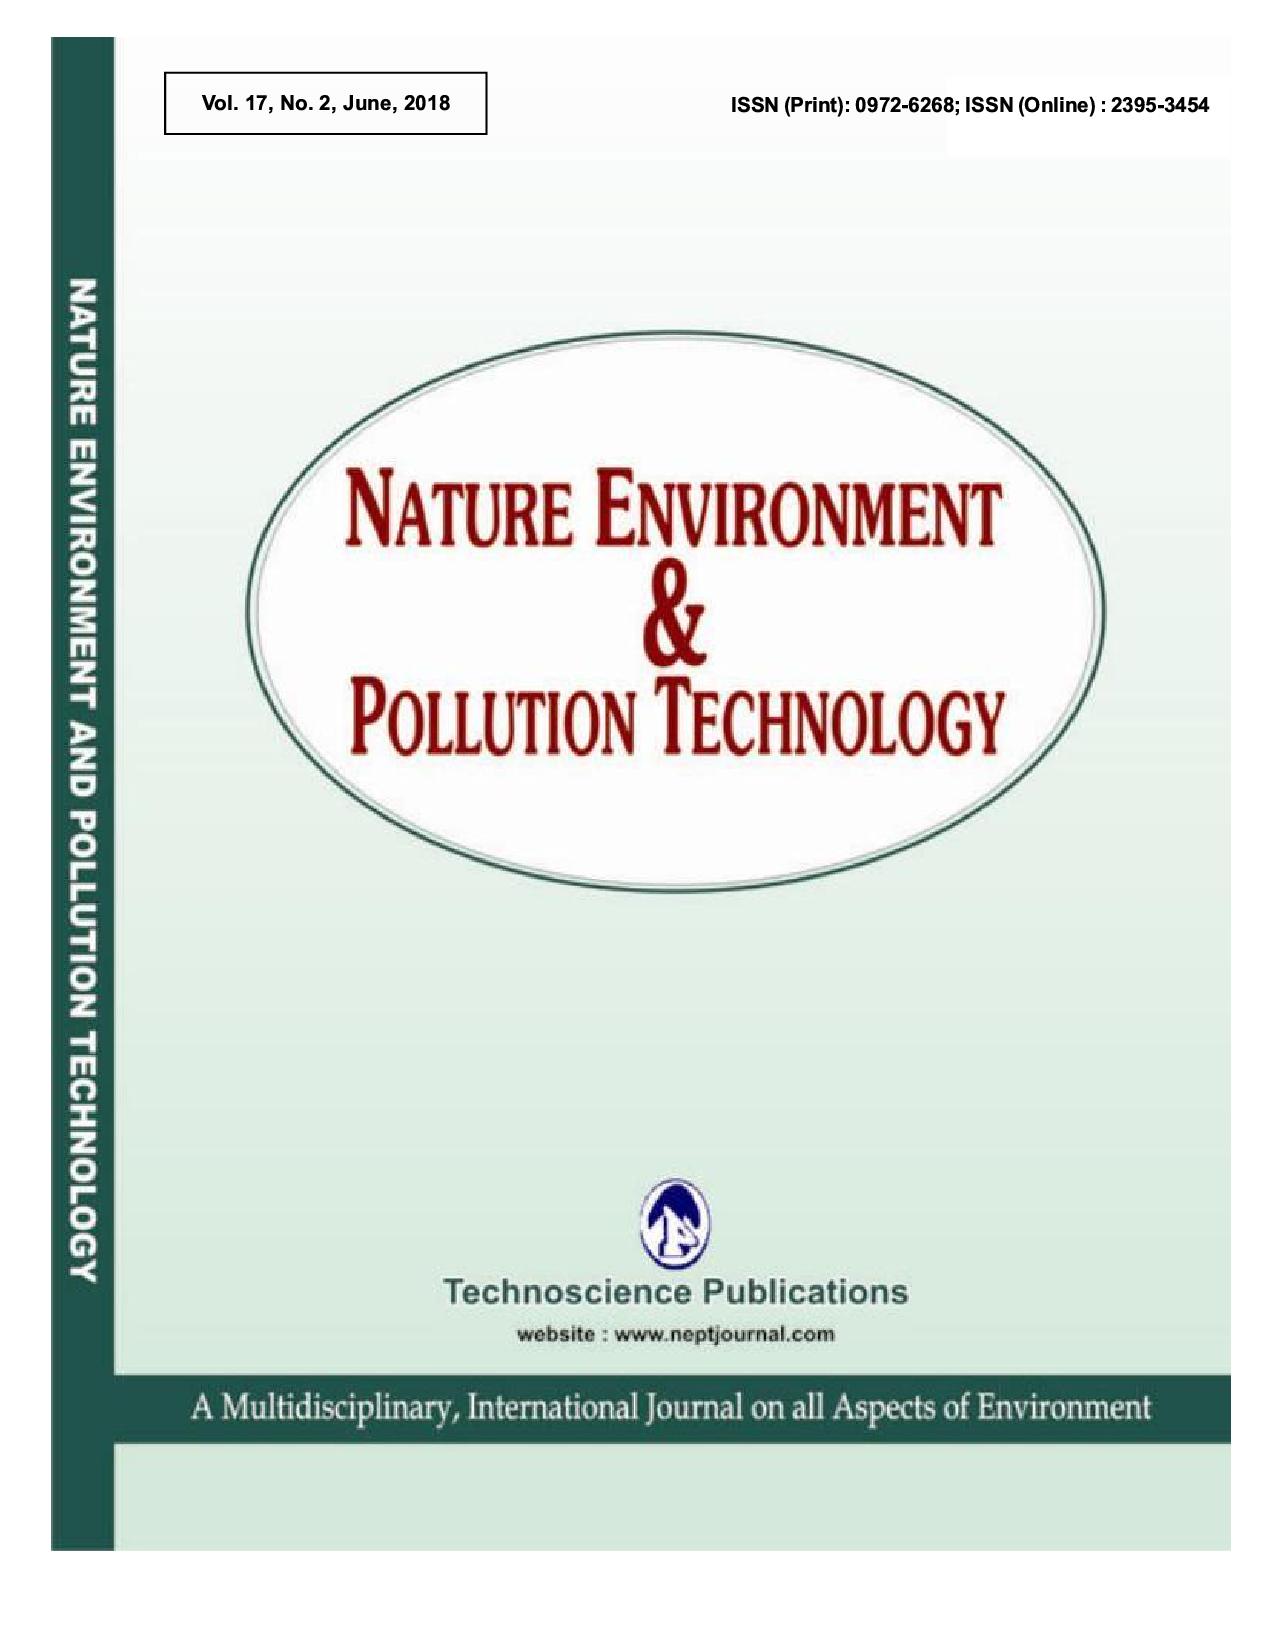 Nature Environment and Pollution Technology